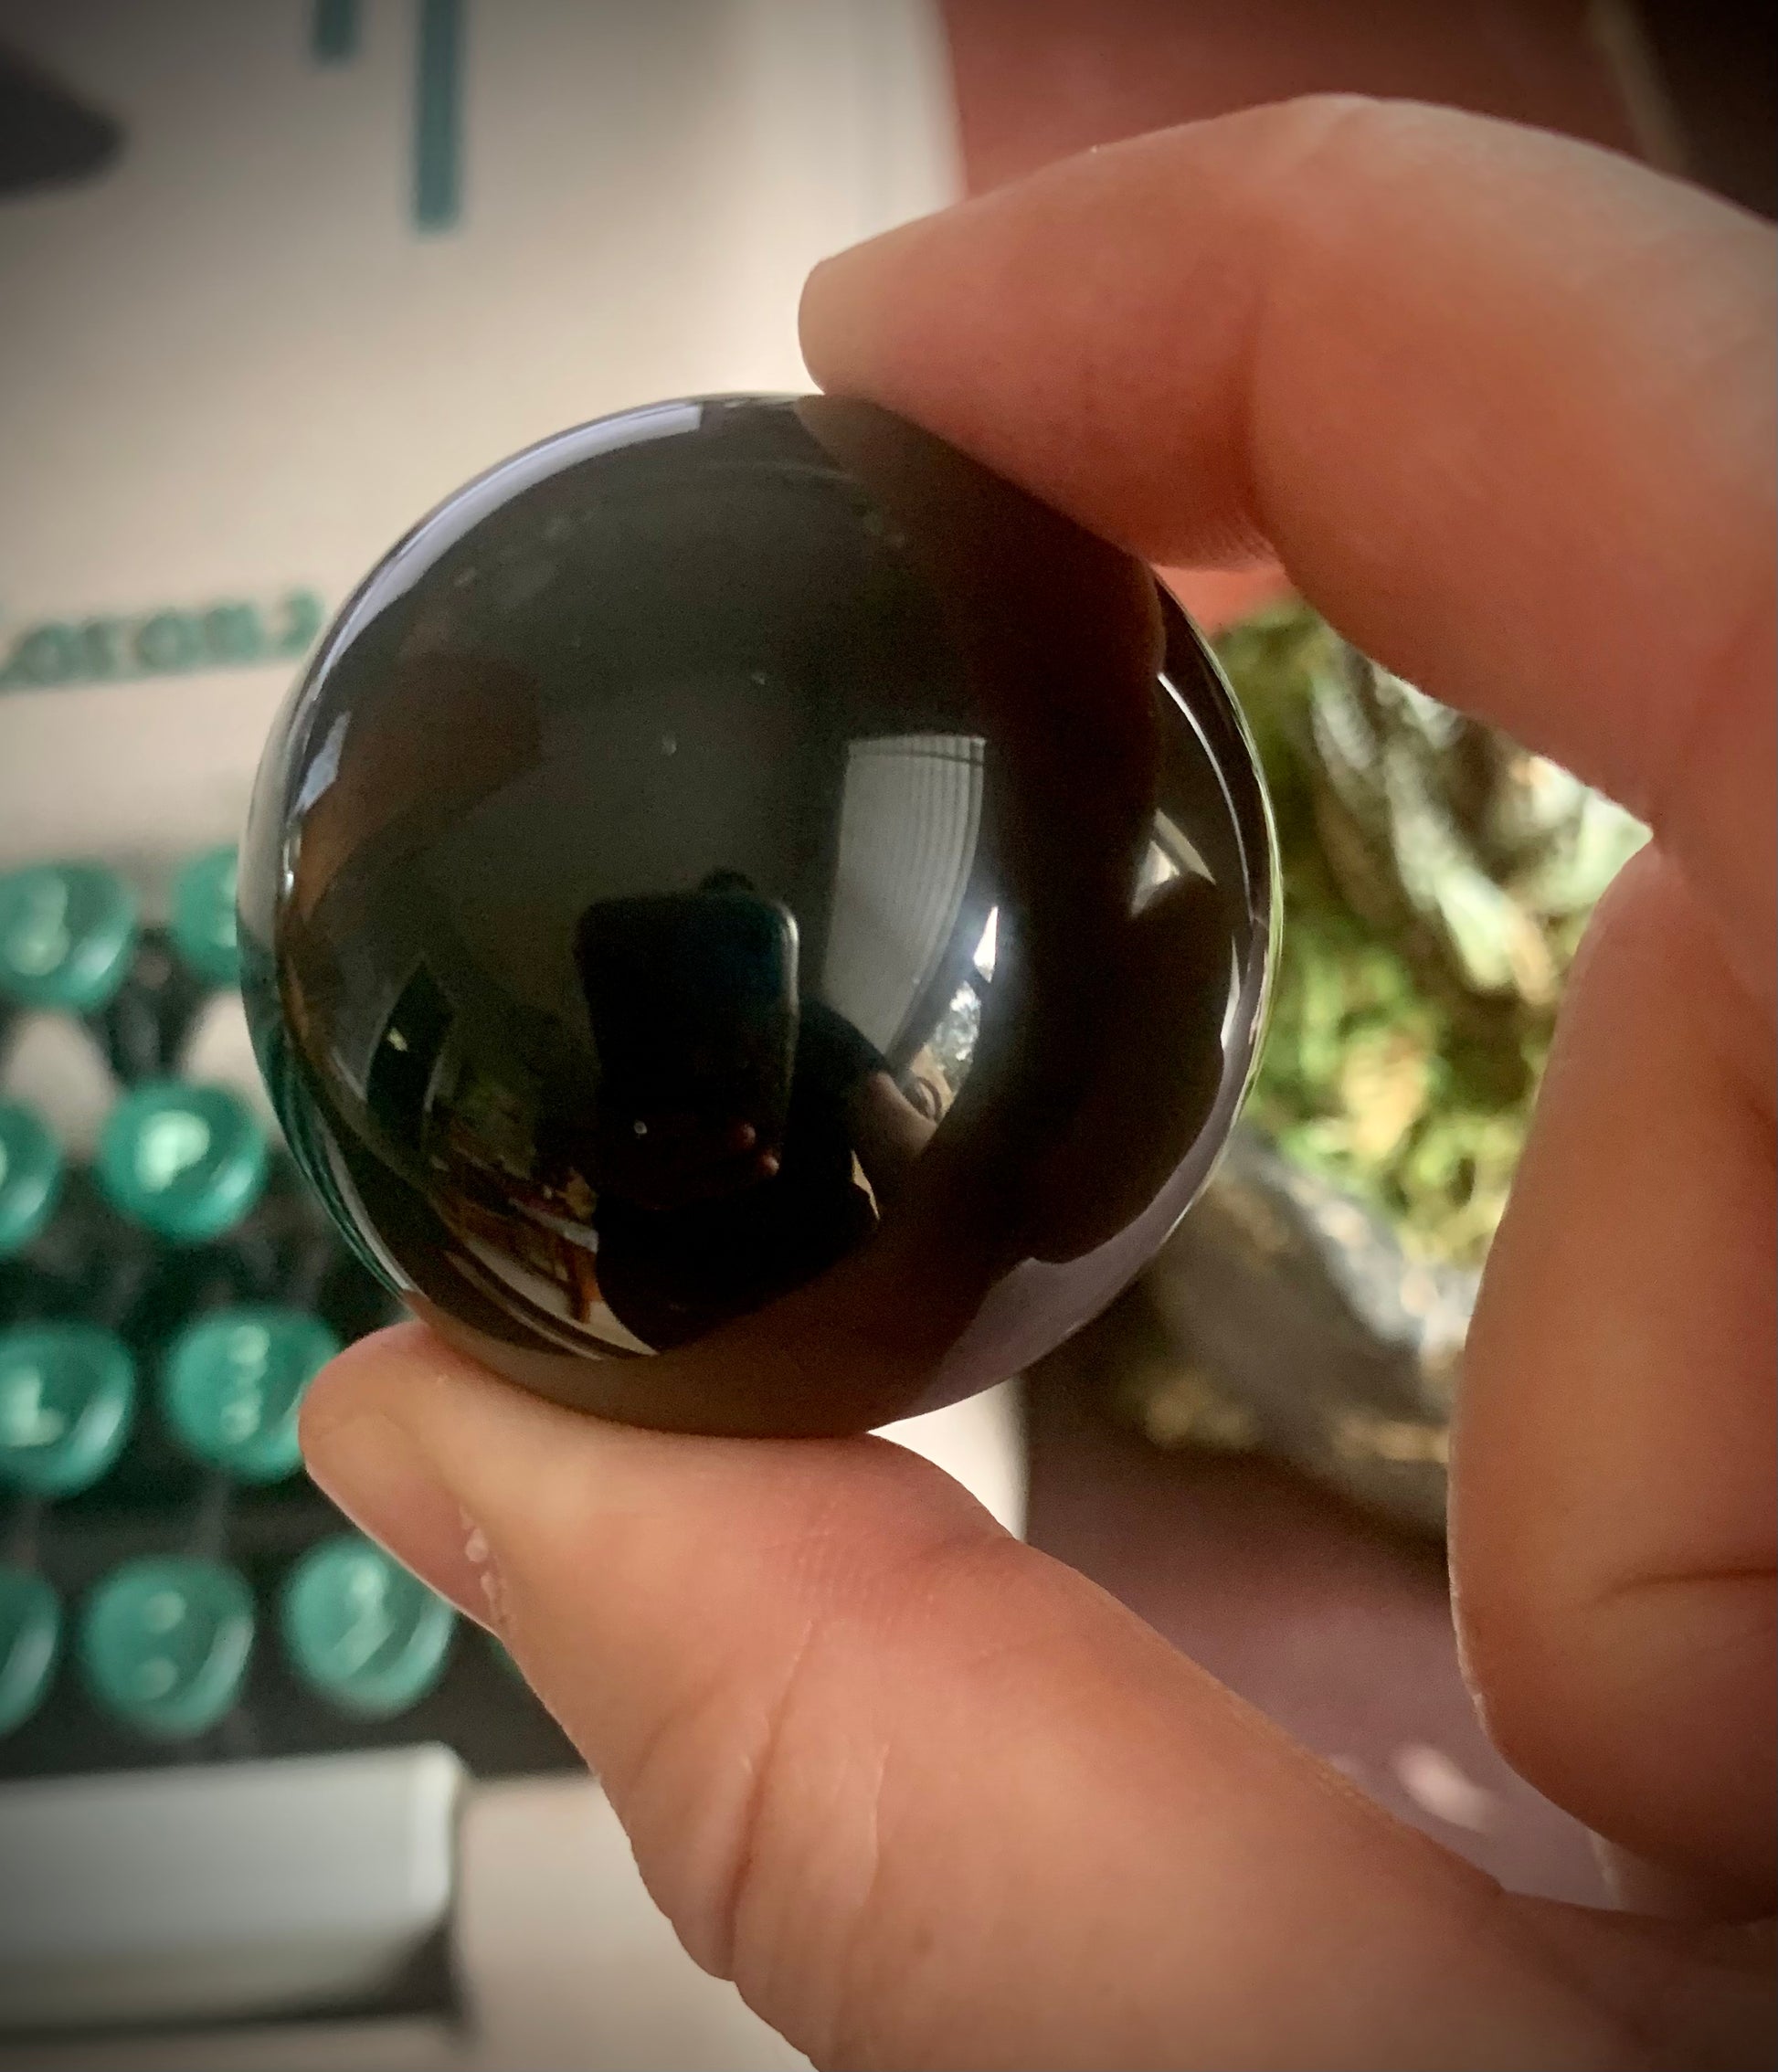 Black obsidian sphere held in between two fingers in front of a green typewriter.